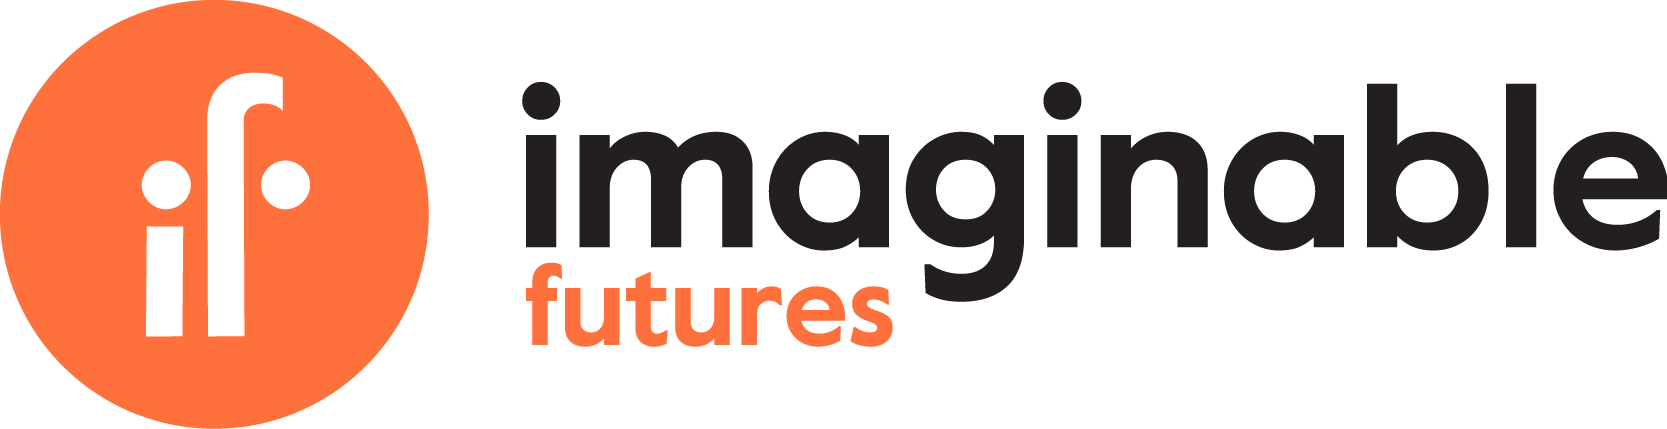 imaginable_futures_LOGO_Color_RGB High Res.png